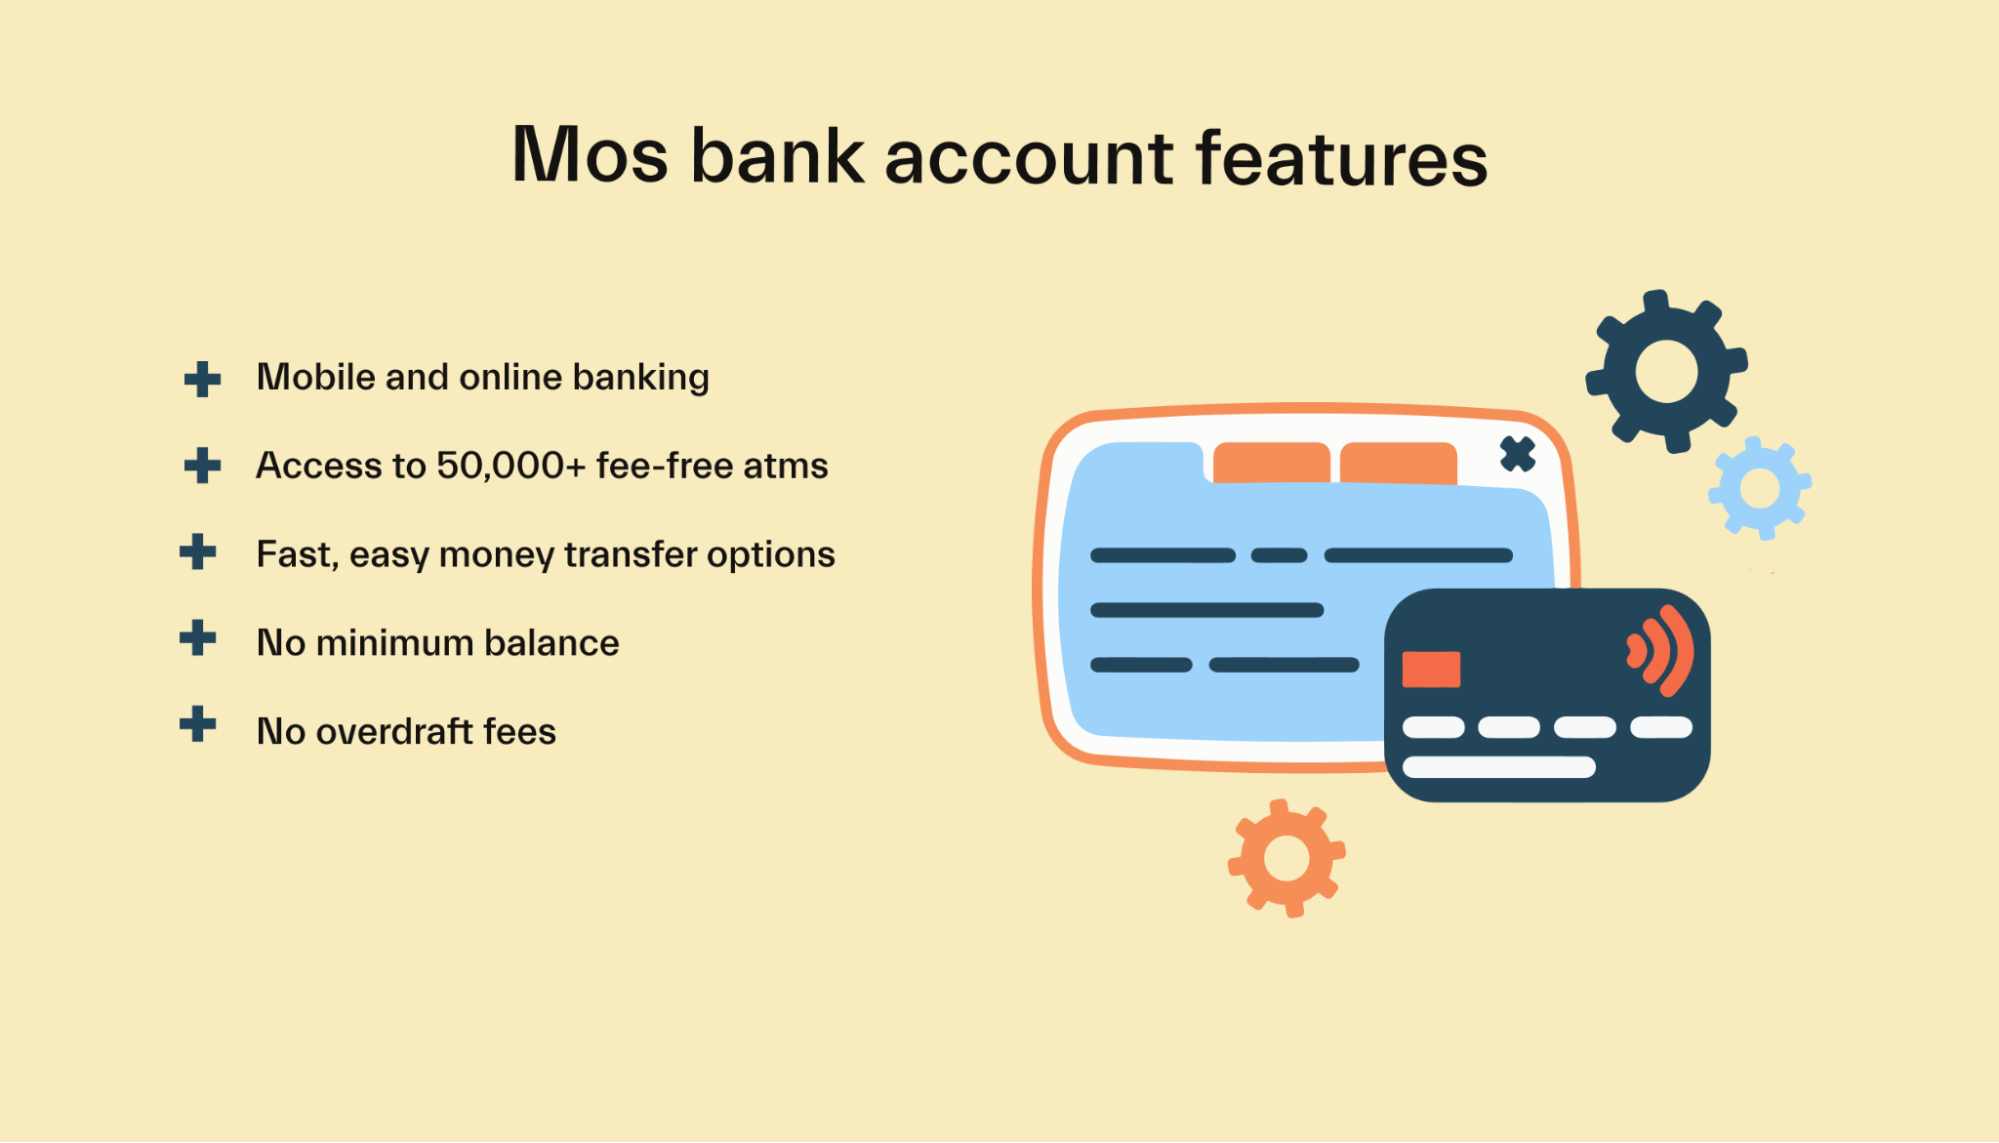 Mos bank account features